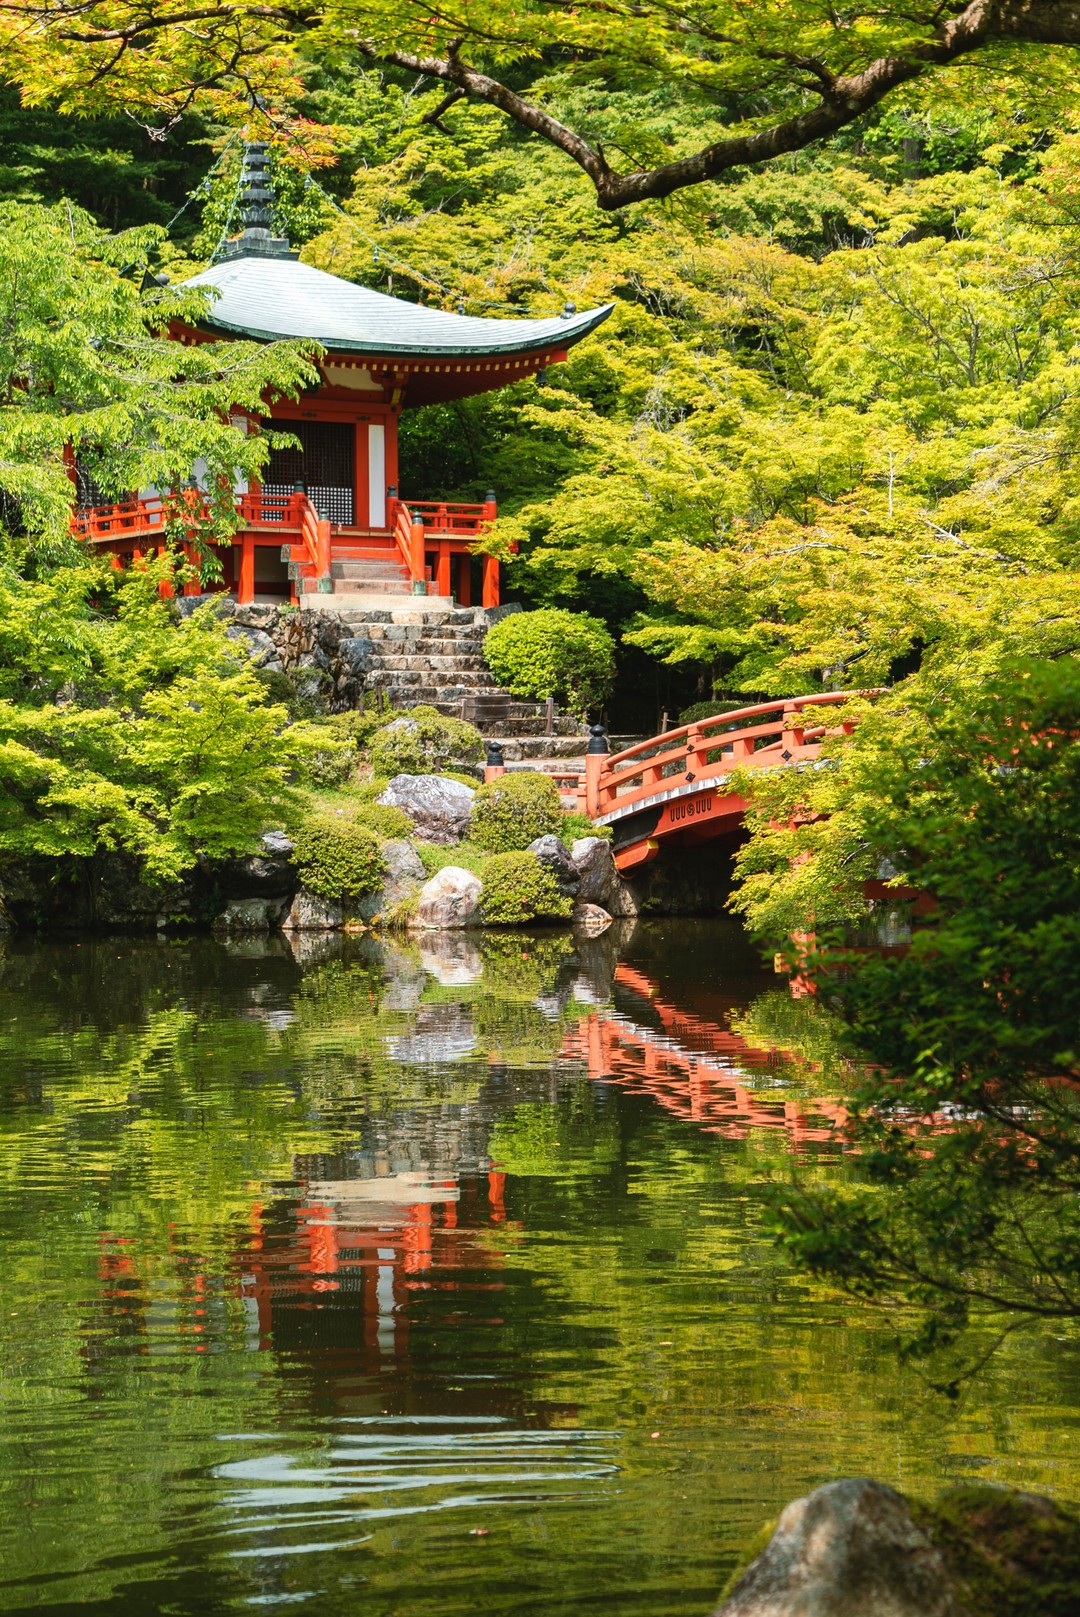 Kyoto, Japan: One of the best romantic getaways for couples who love culture.